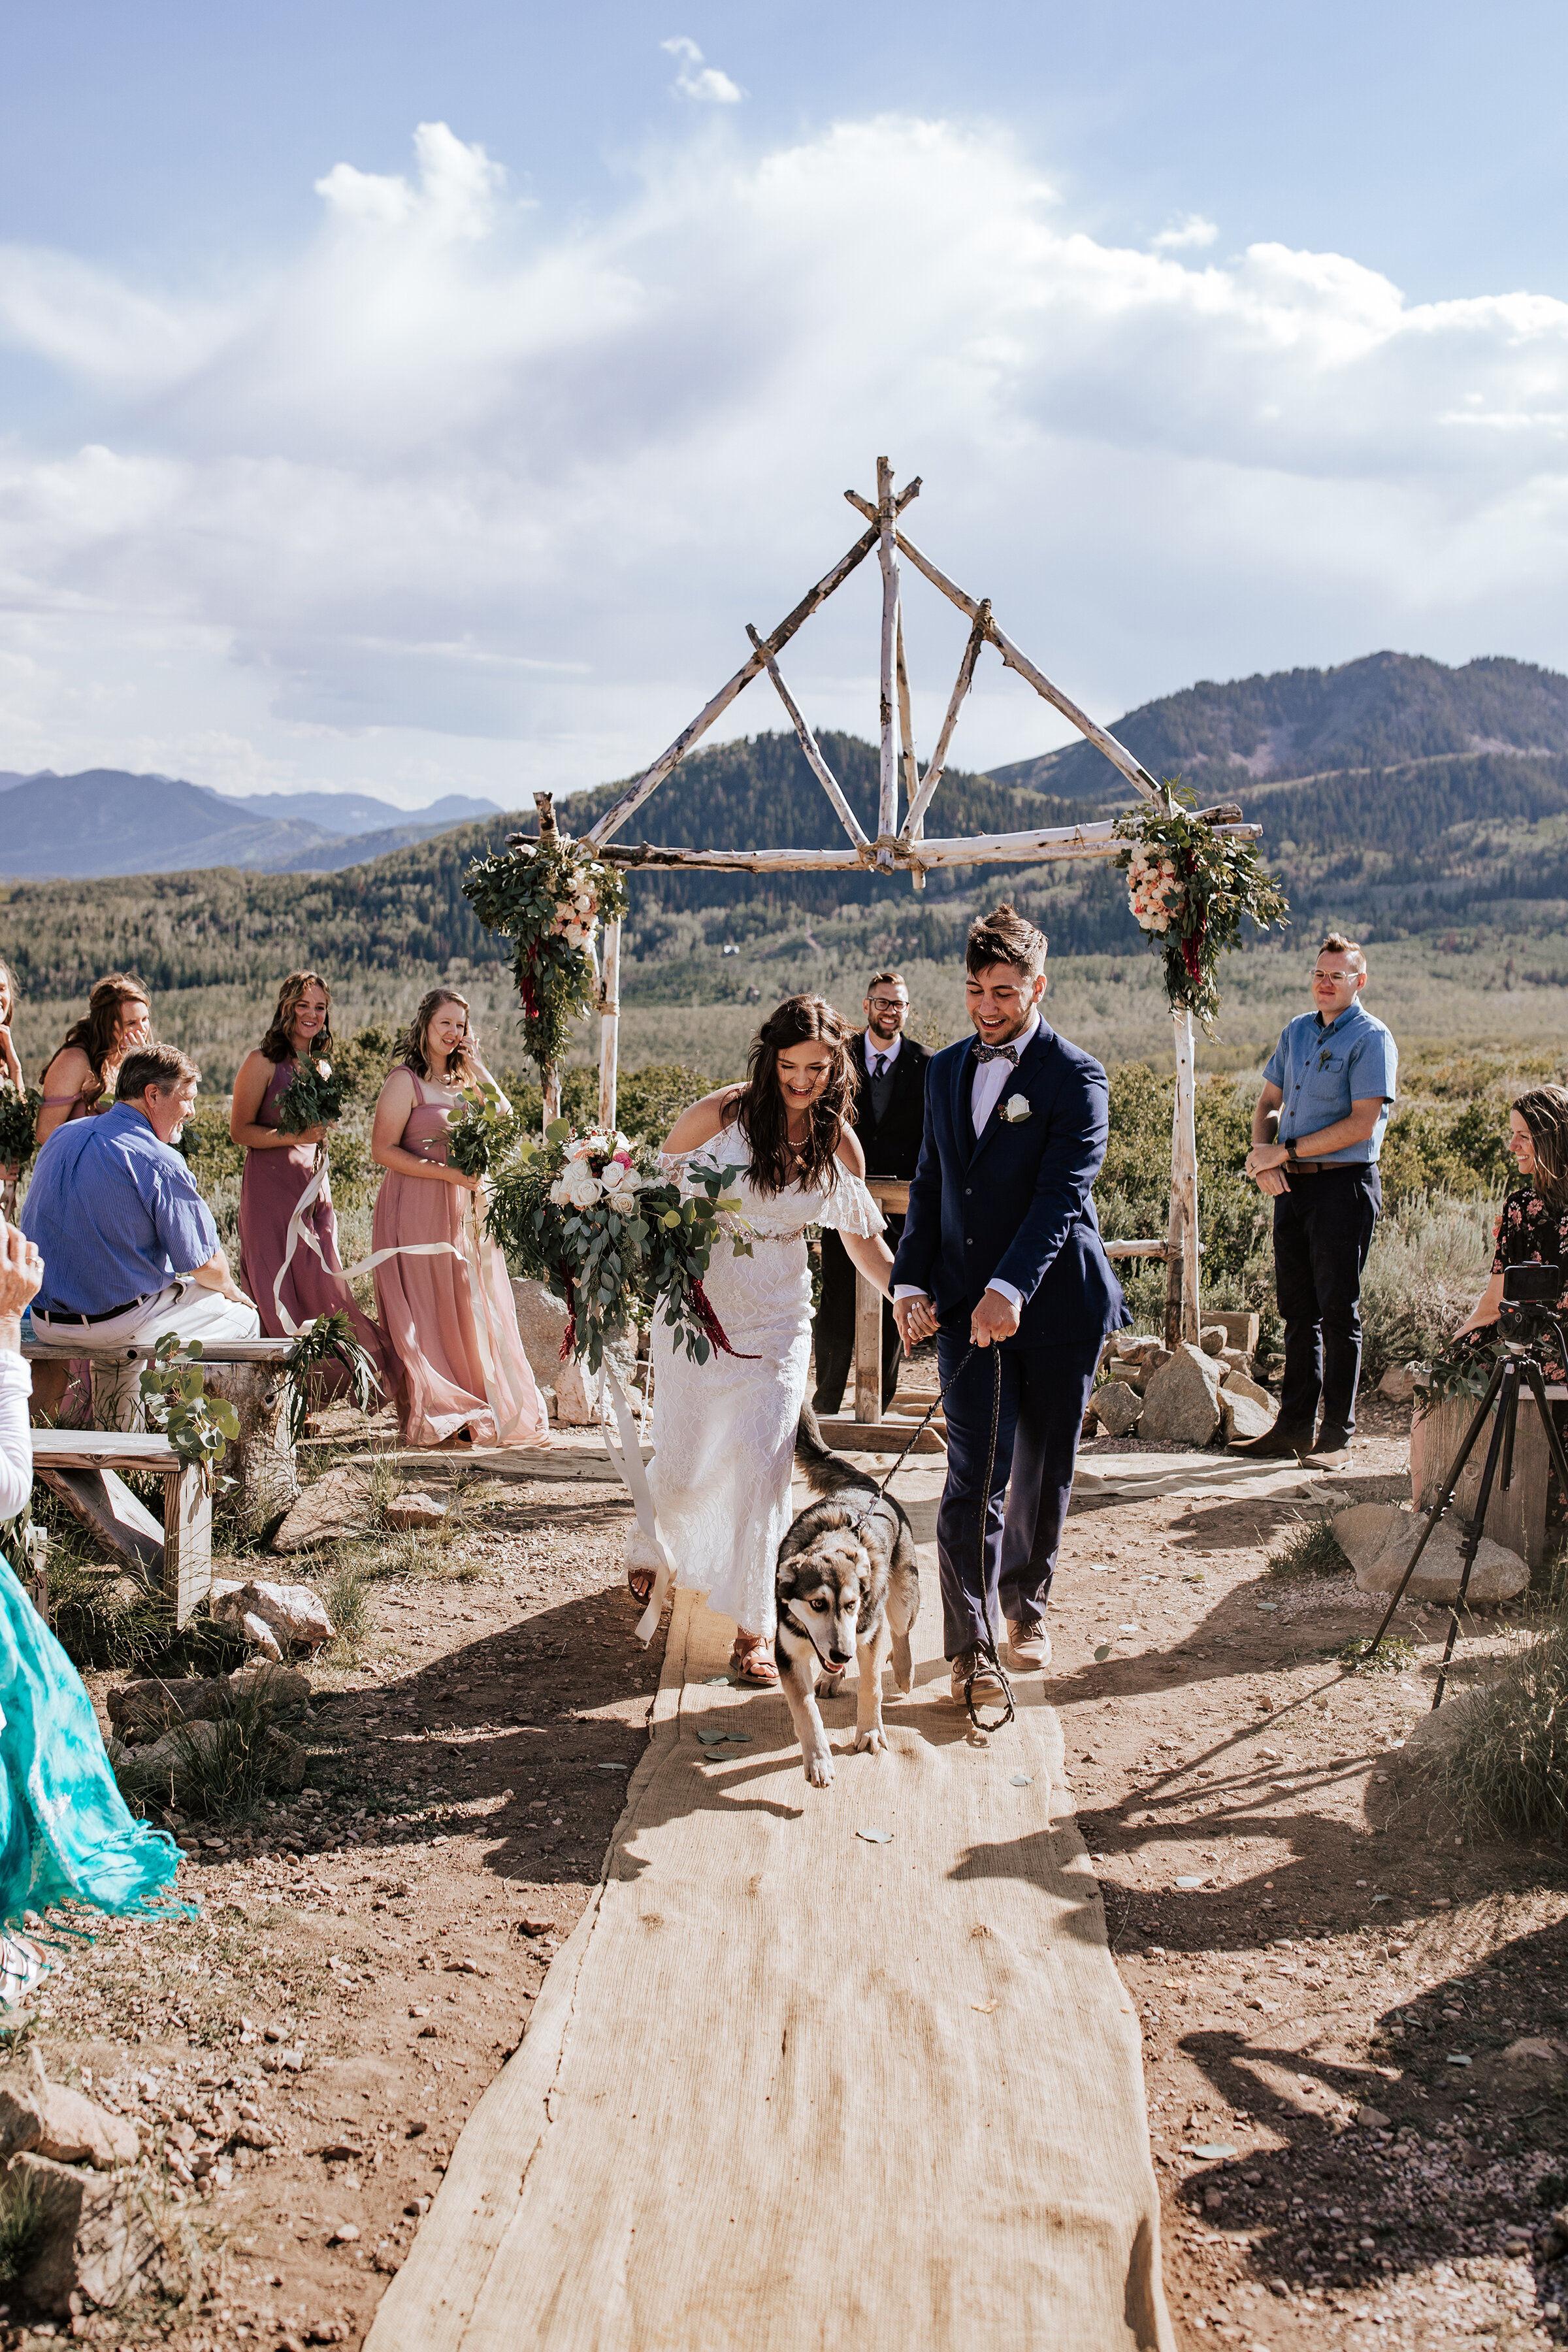  A newly married husband and wife walk down the dusty isle in a rustic desert themed elopement in the Utah desert. Professional elopement photographer Emily Jenkins Photography rustic desert themed wedding inspiration ideas and goals unique wedding a